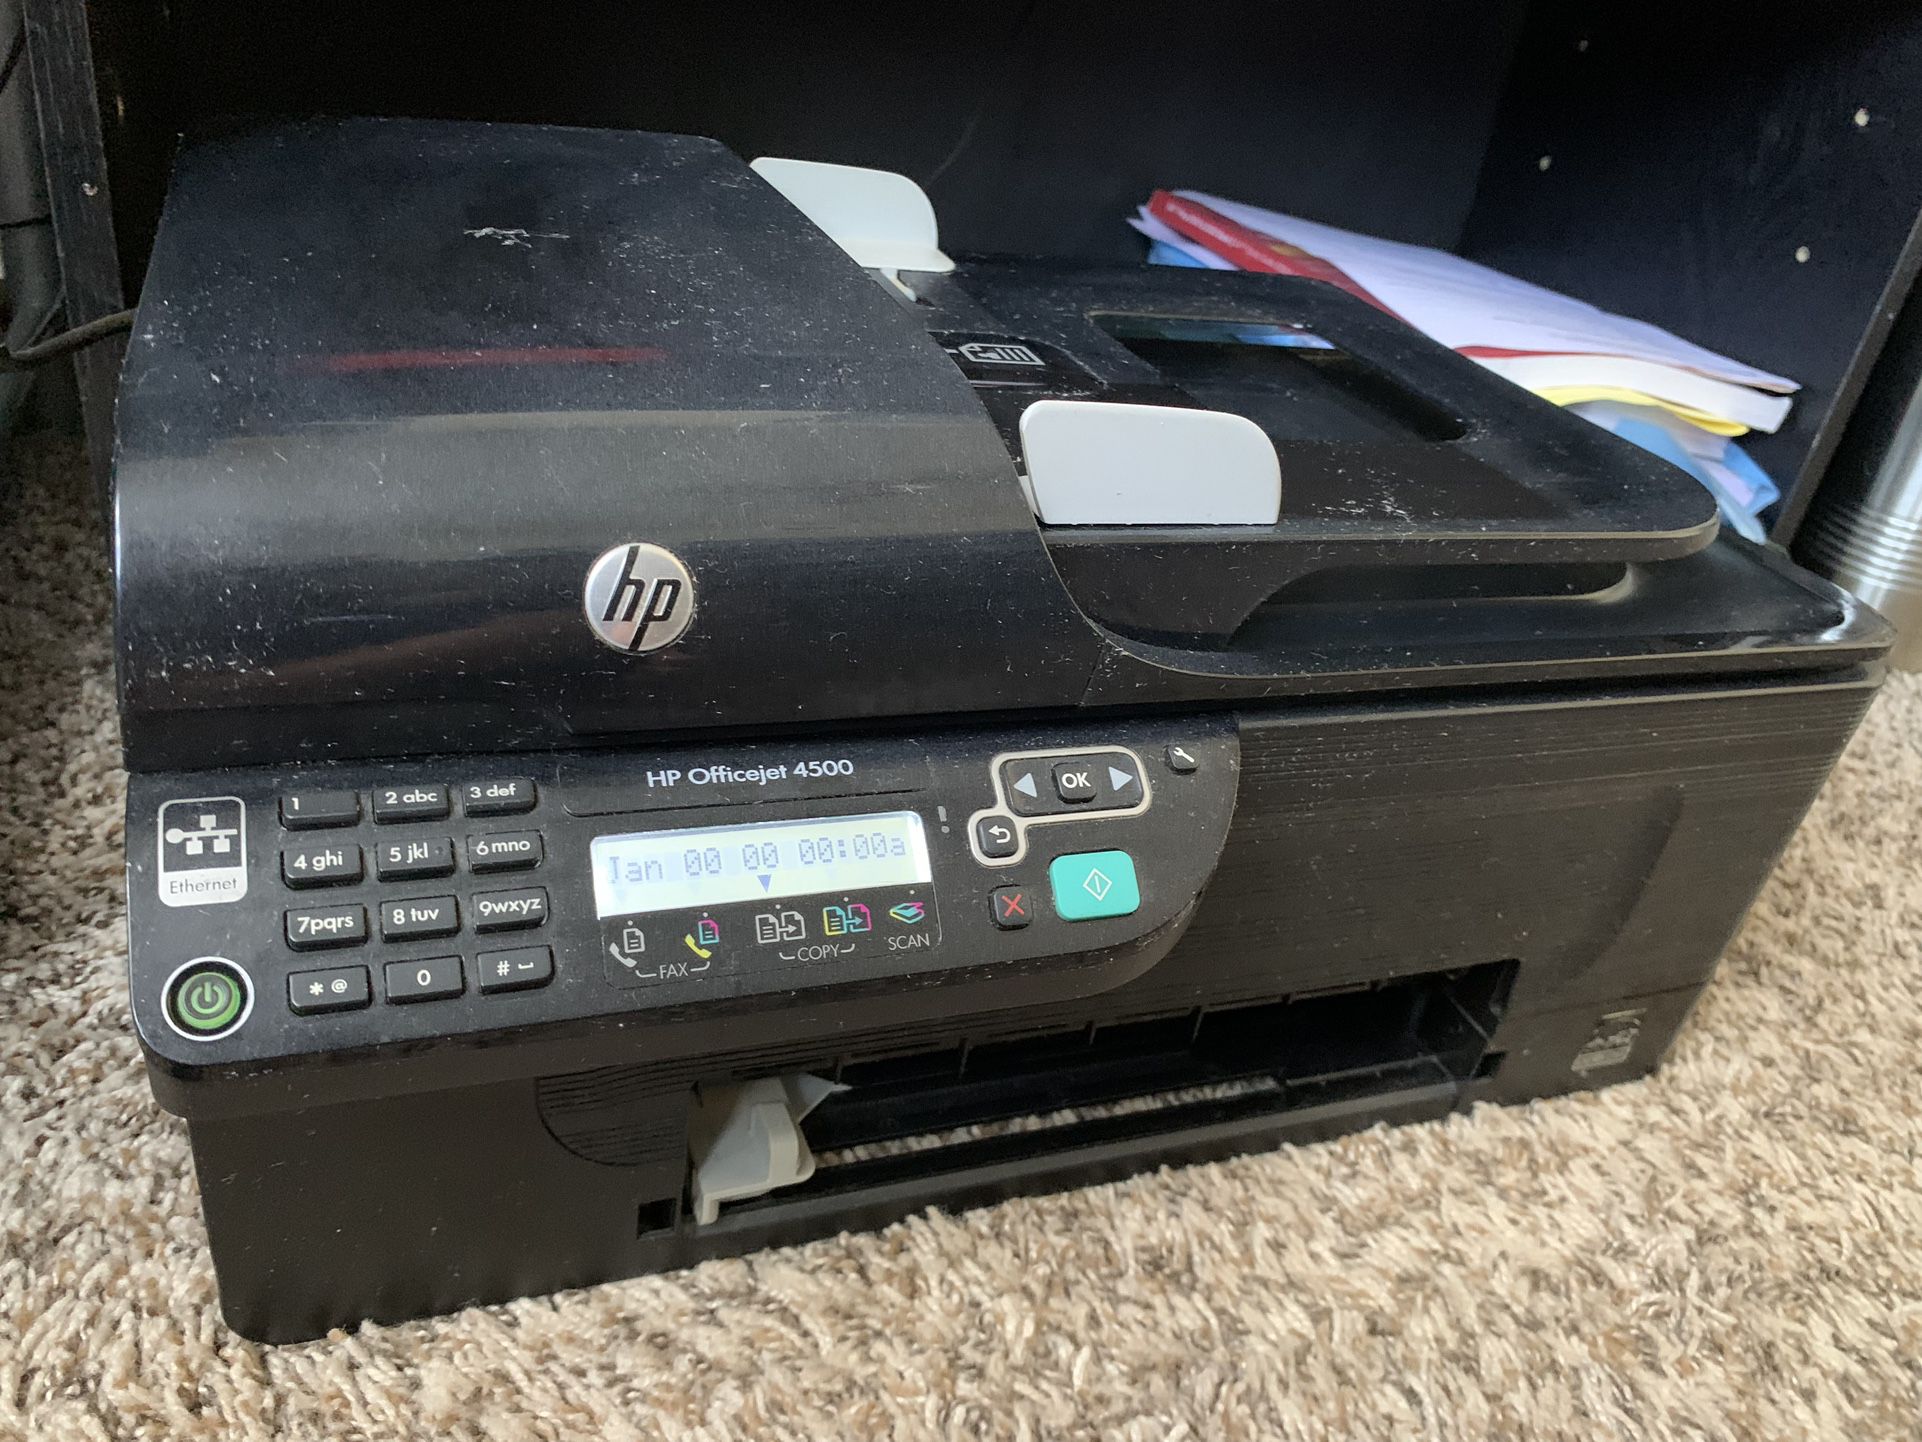 HP Office jet 4500 All In One Printer